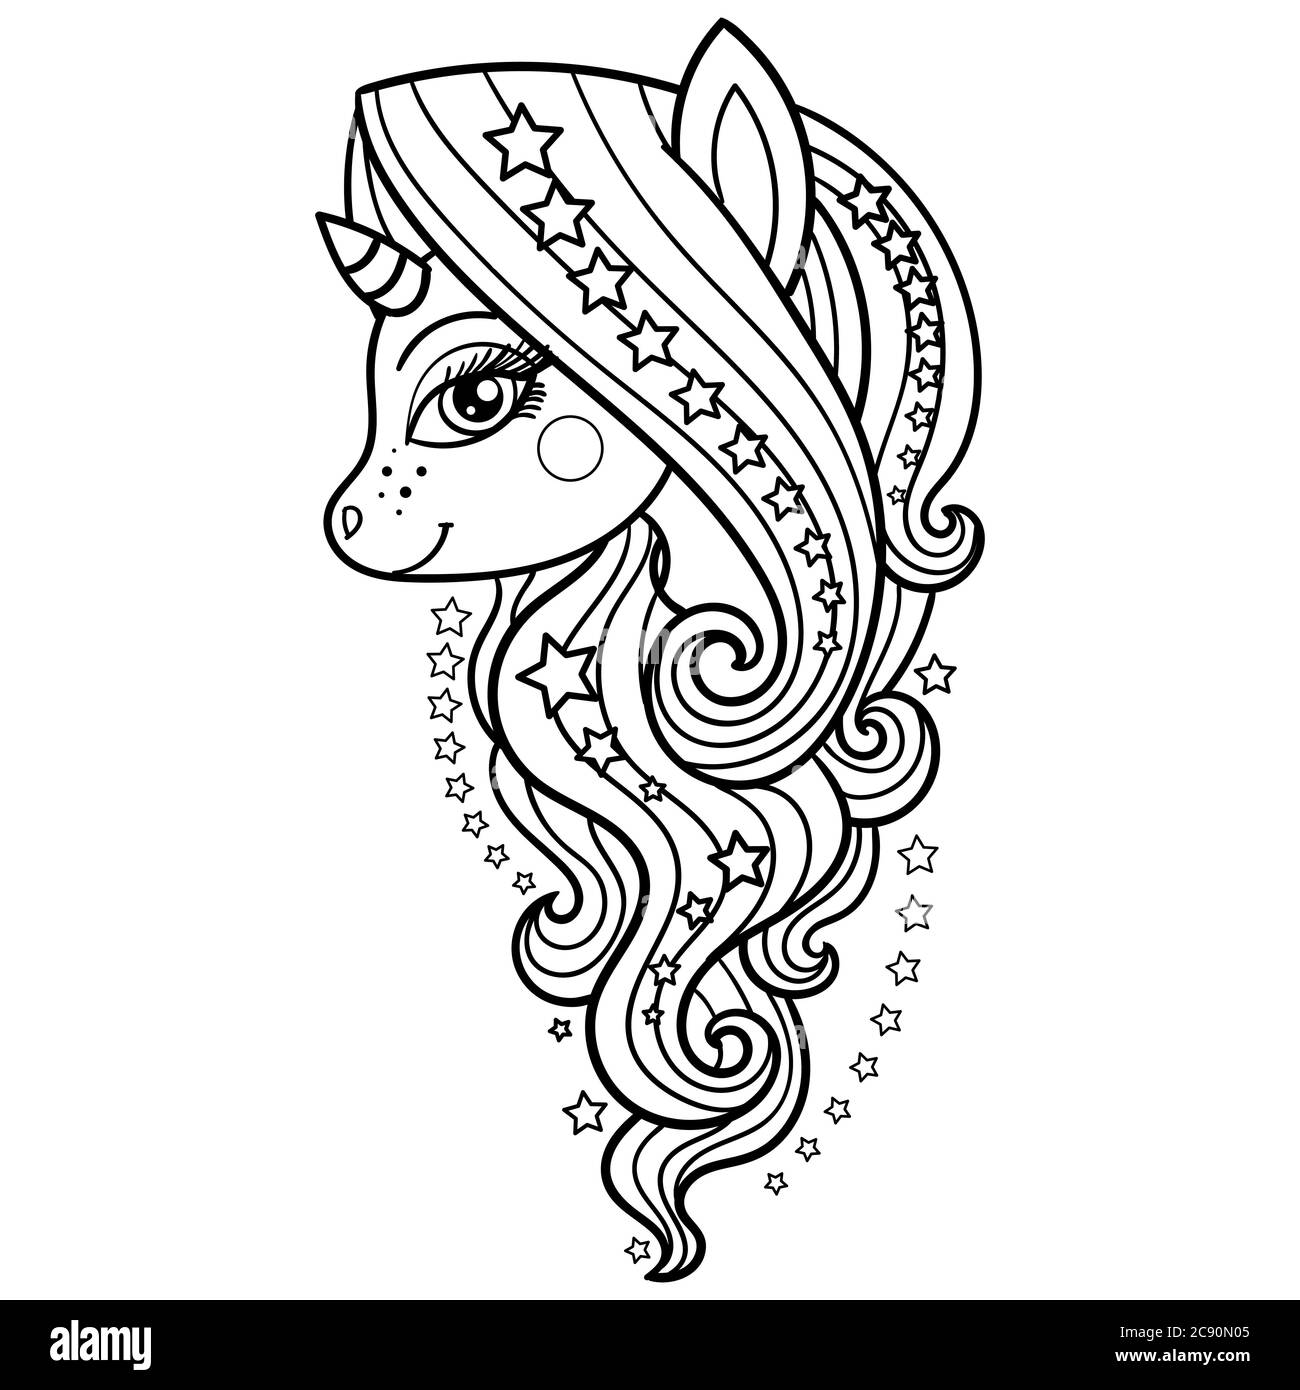 Unicorn with a long mane and stars. Black and white. Fantasy animal. For the design of prints, posters, coloring books, tattoos, etc. Vector Stock Vector